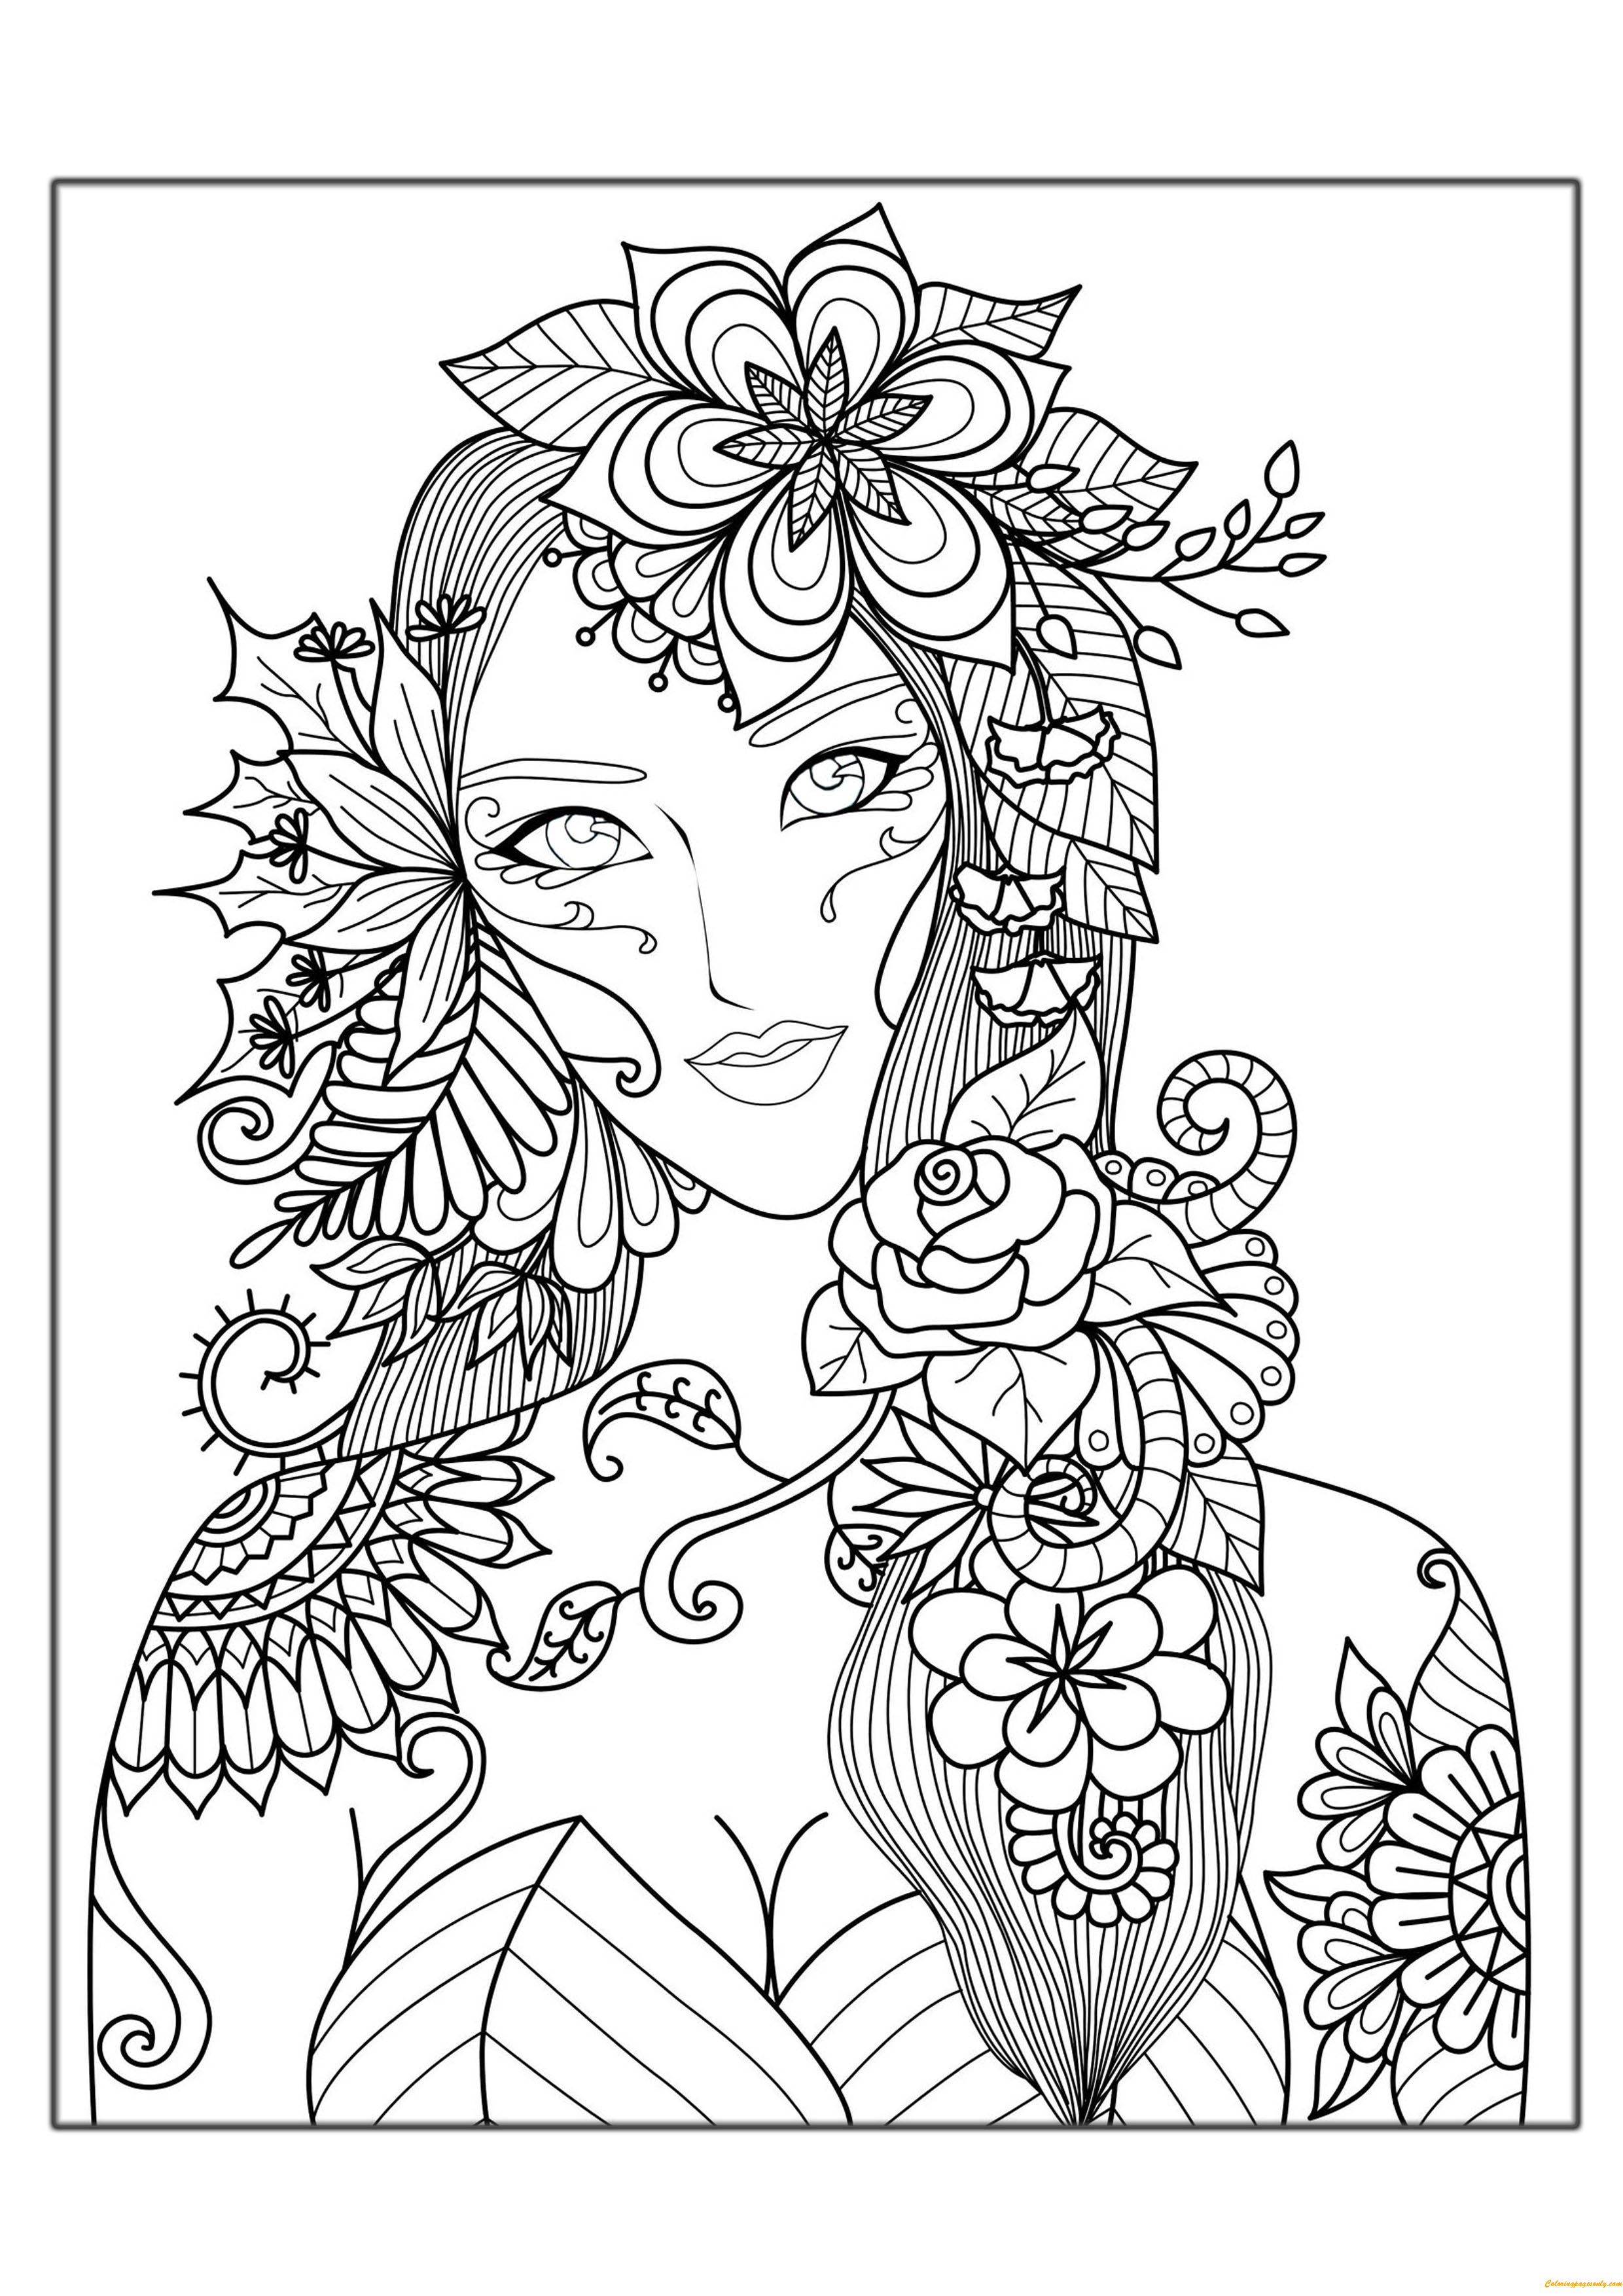 Flower Girl Coloring Page - Free Coloring Pages Online